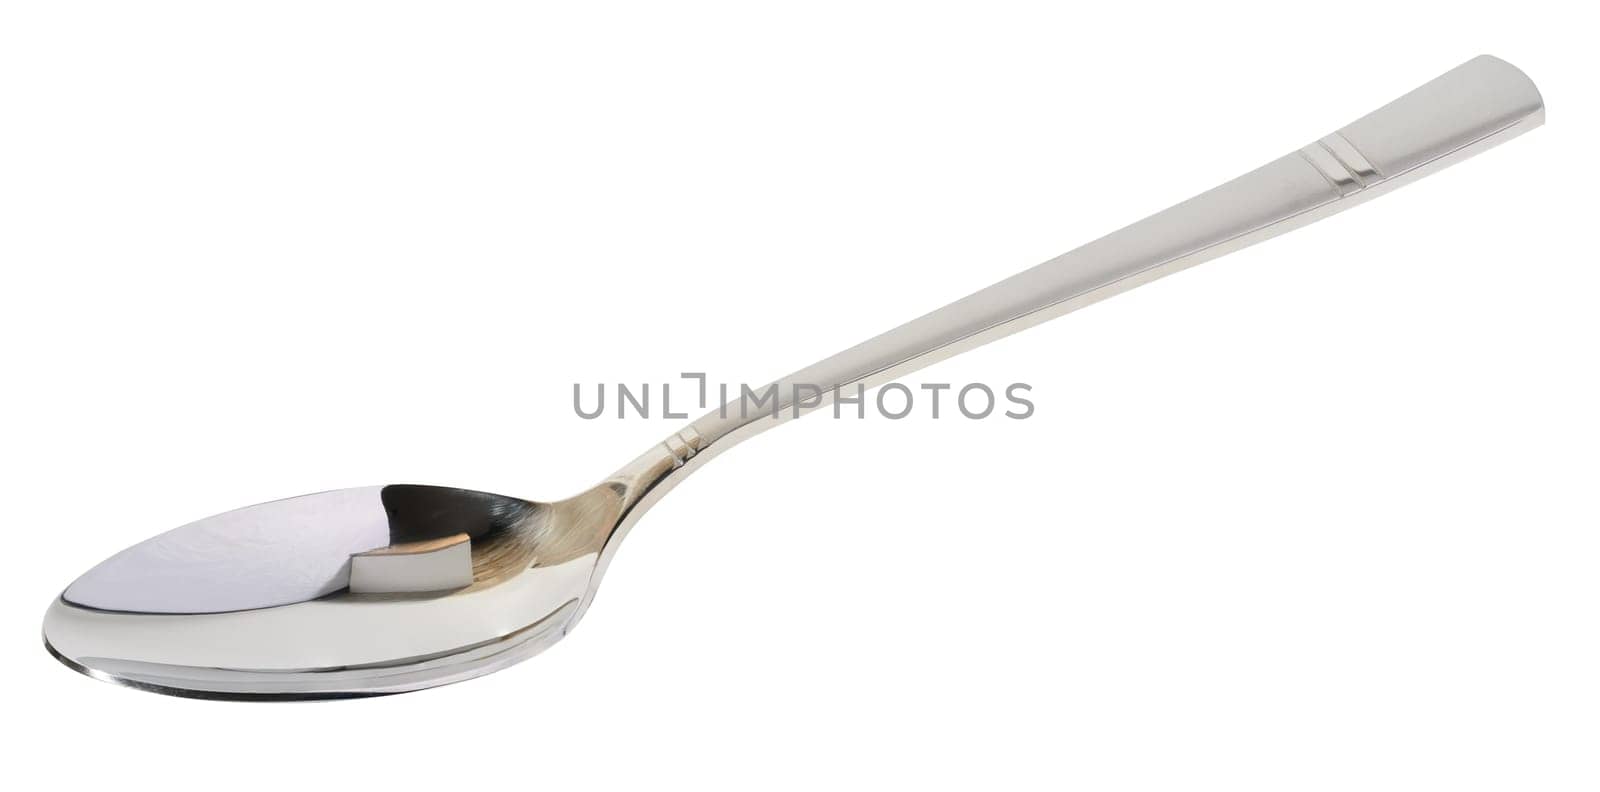 New steel dinner spoon on isolated background, top view